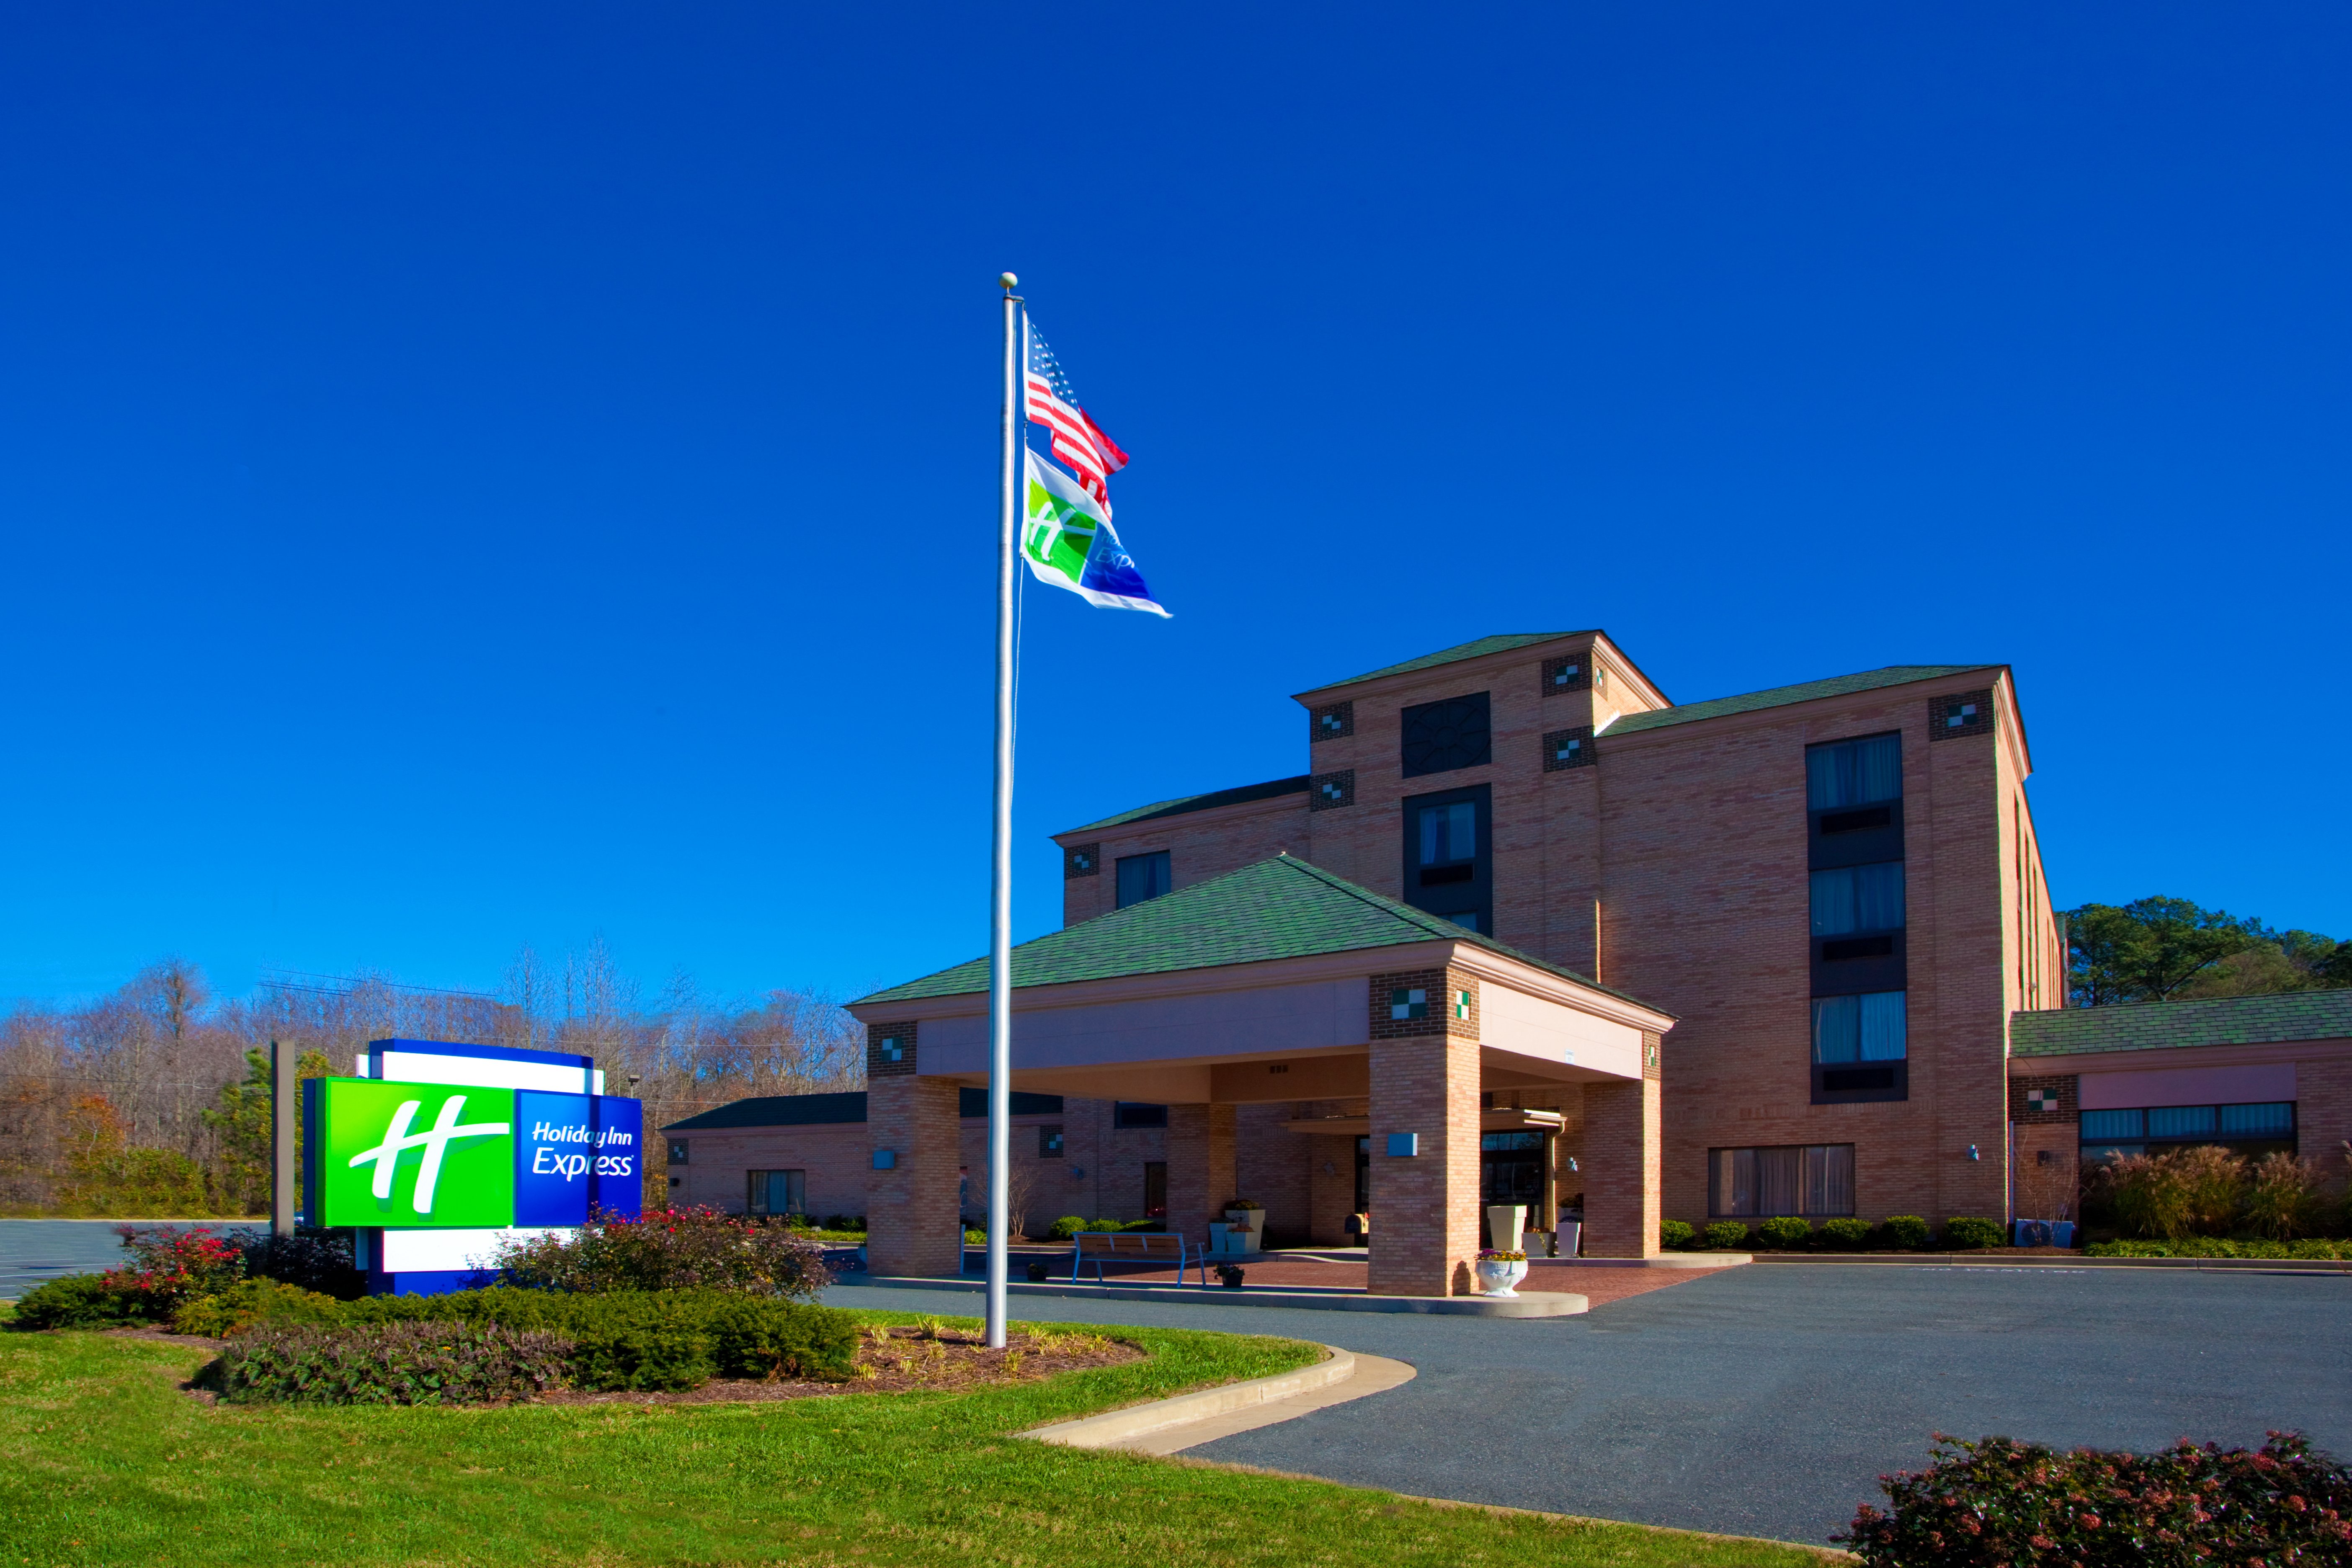 Welcome to the Holiday Inn Express Easton!  